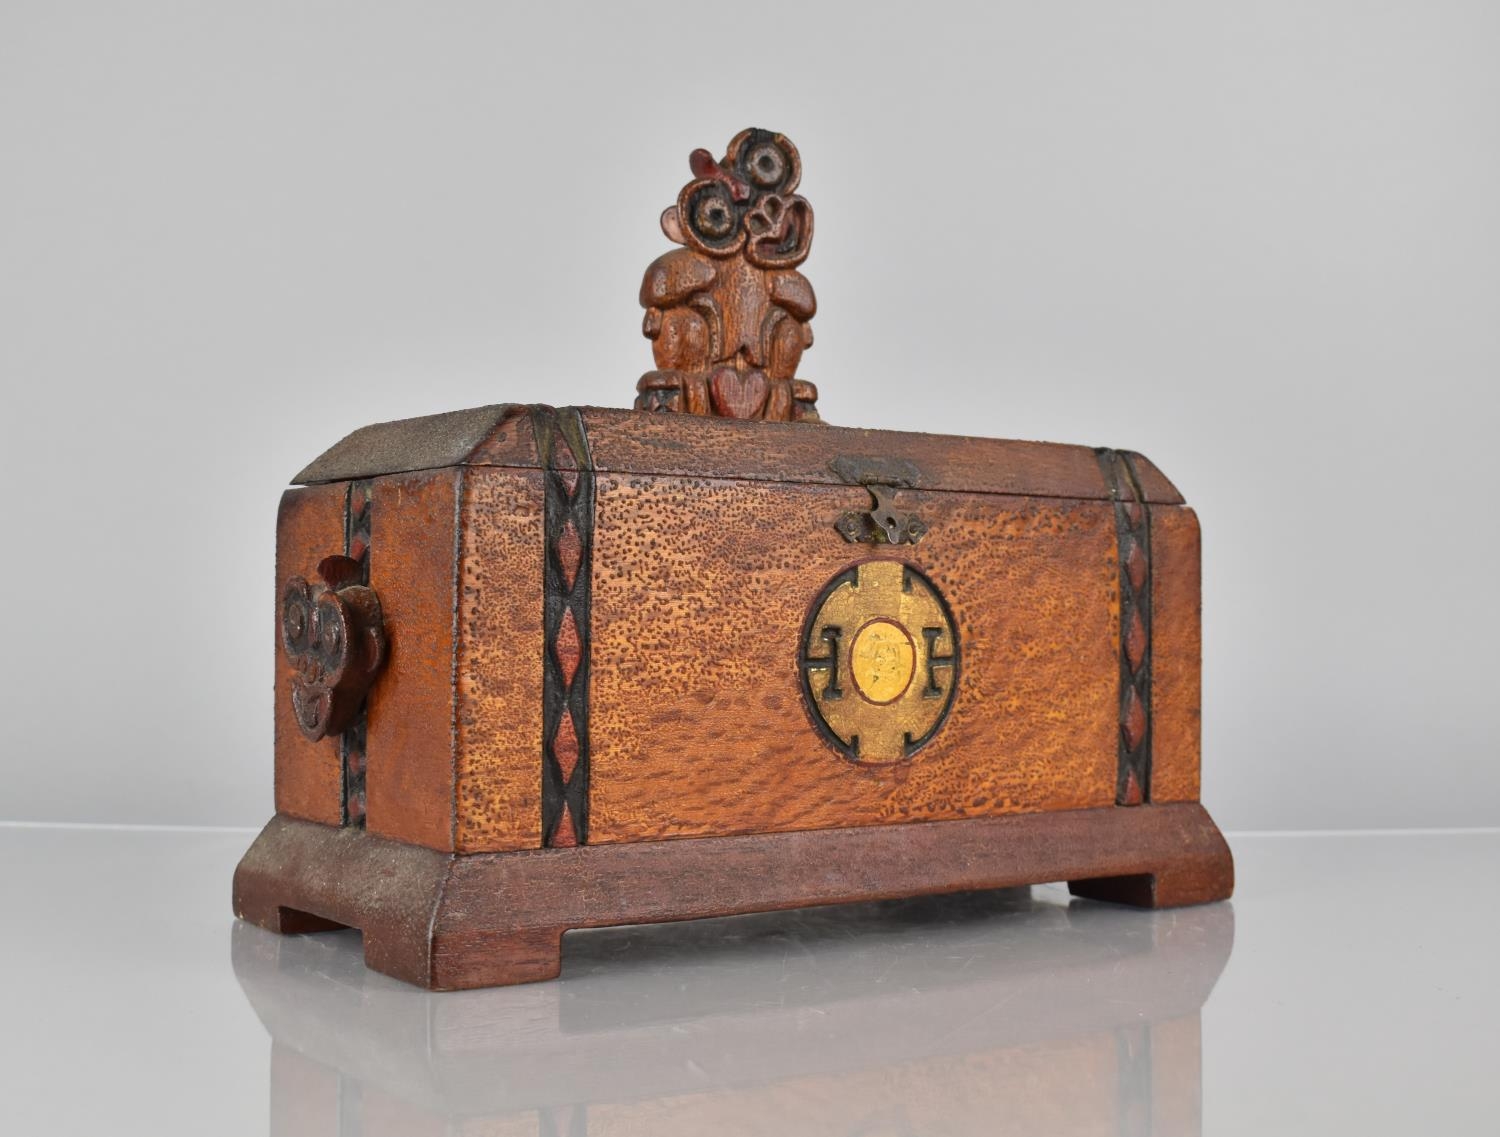 An Early 20th Century New Zealand Maori Carved Wooden Box, Top Decorated with a Carved Hei-Tiki